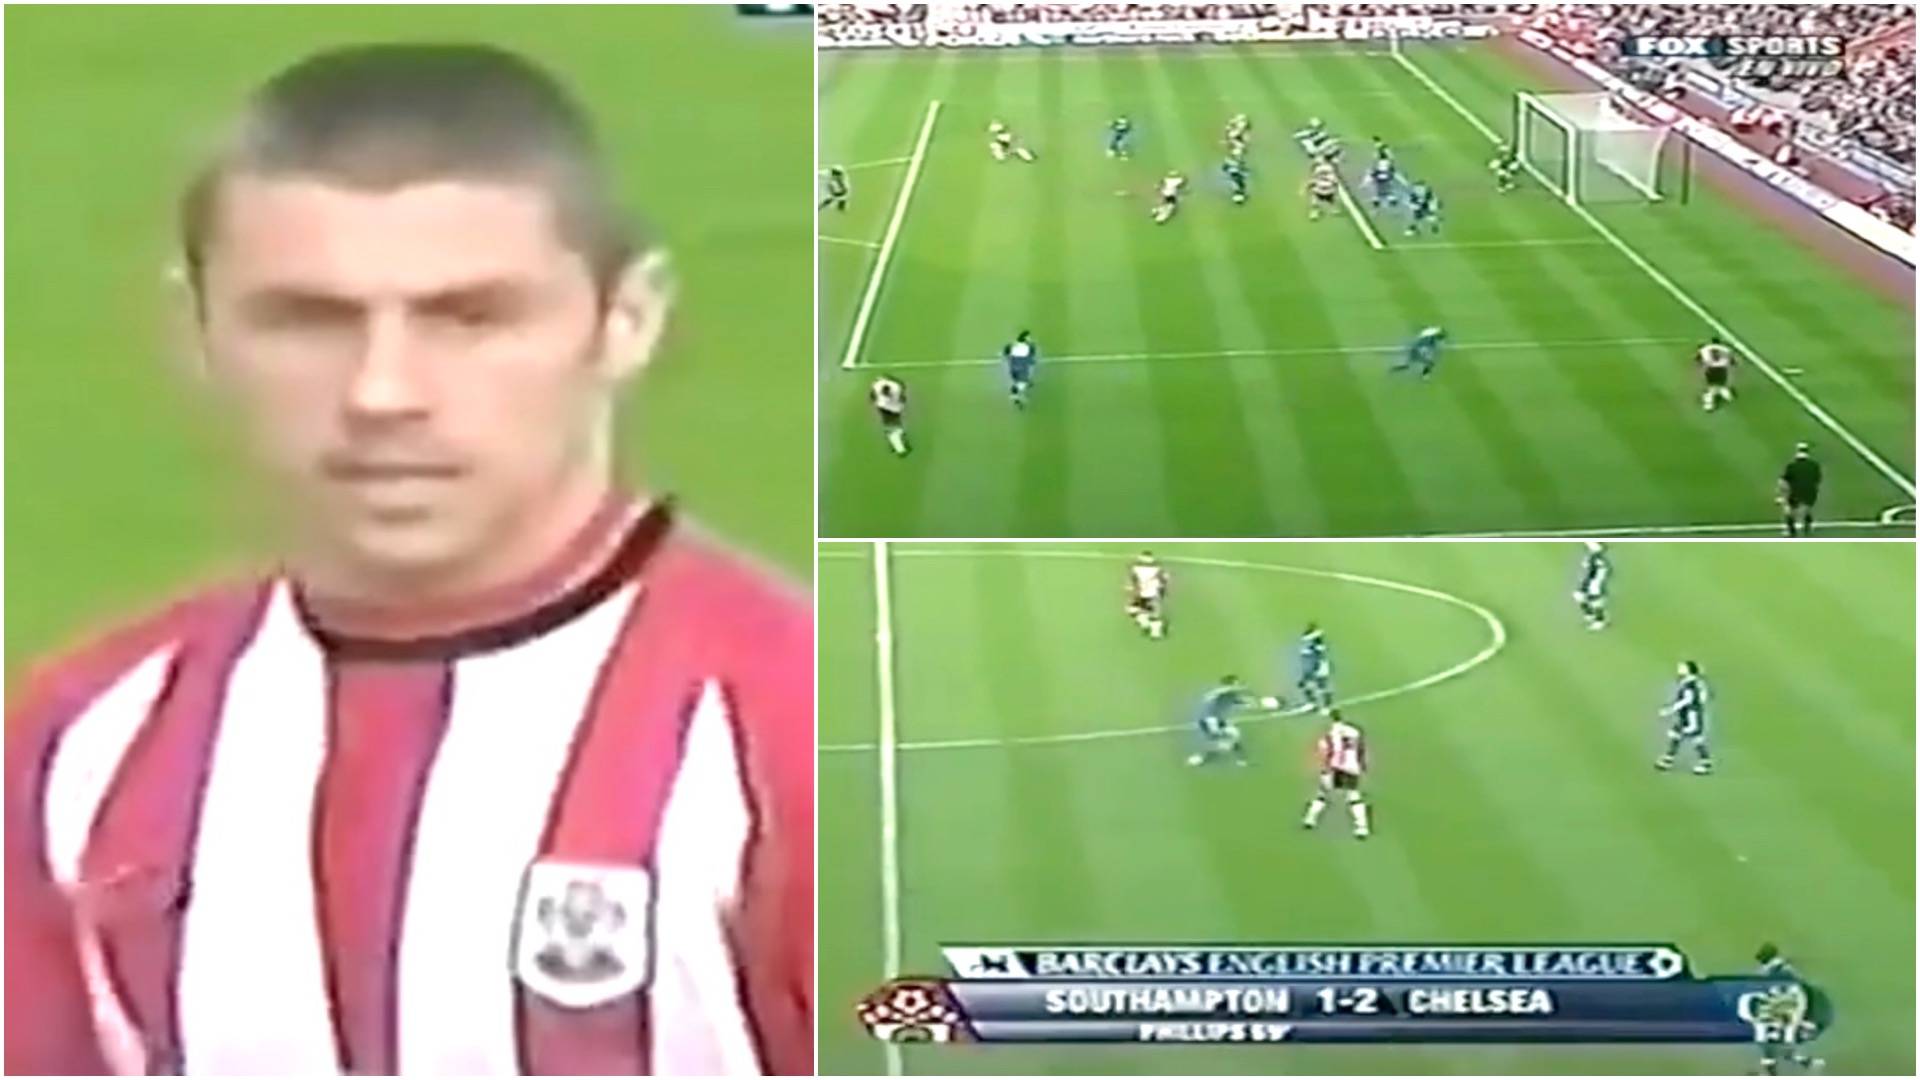 Commentary for Kevin Phillips’ goal for Southampton vs Chelsea in 2005 emerges and it’s pure gold